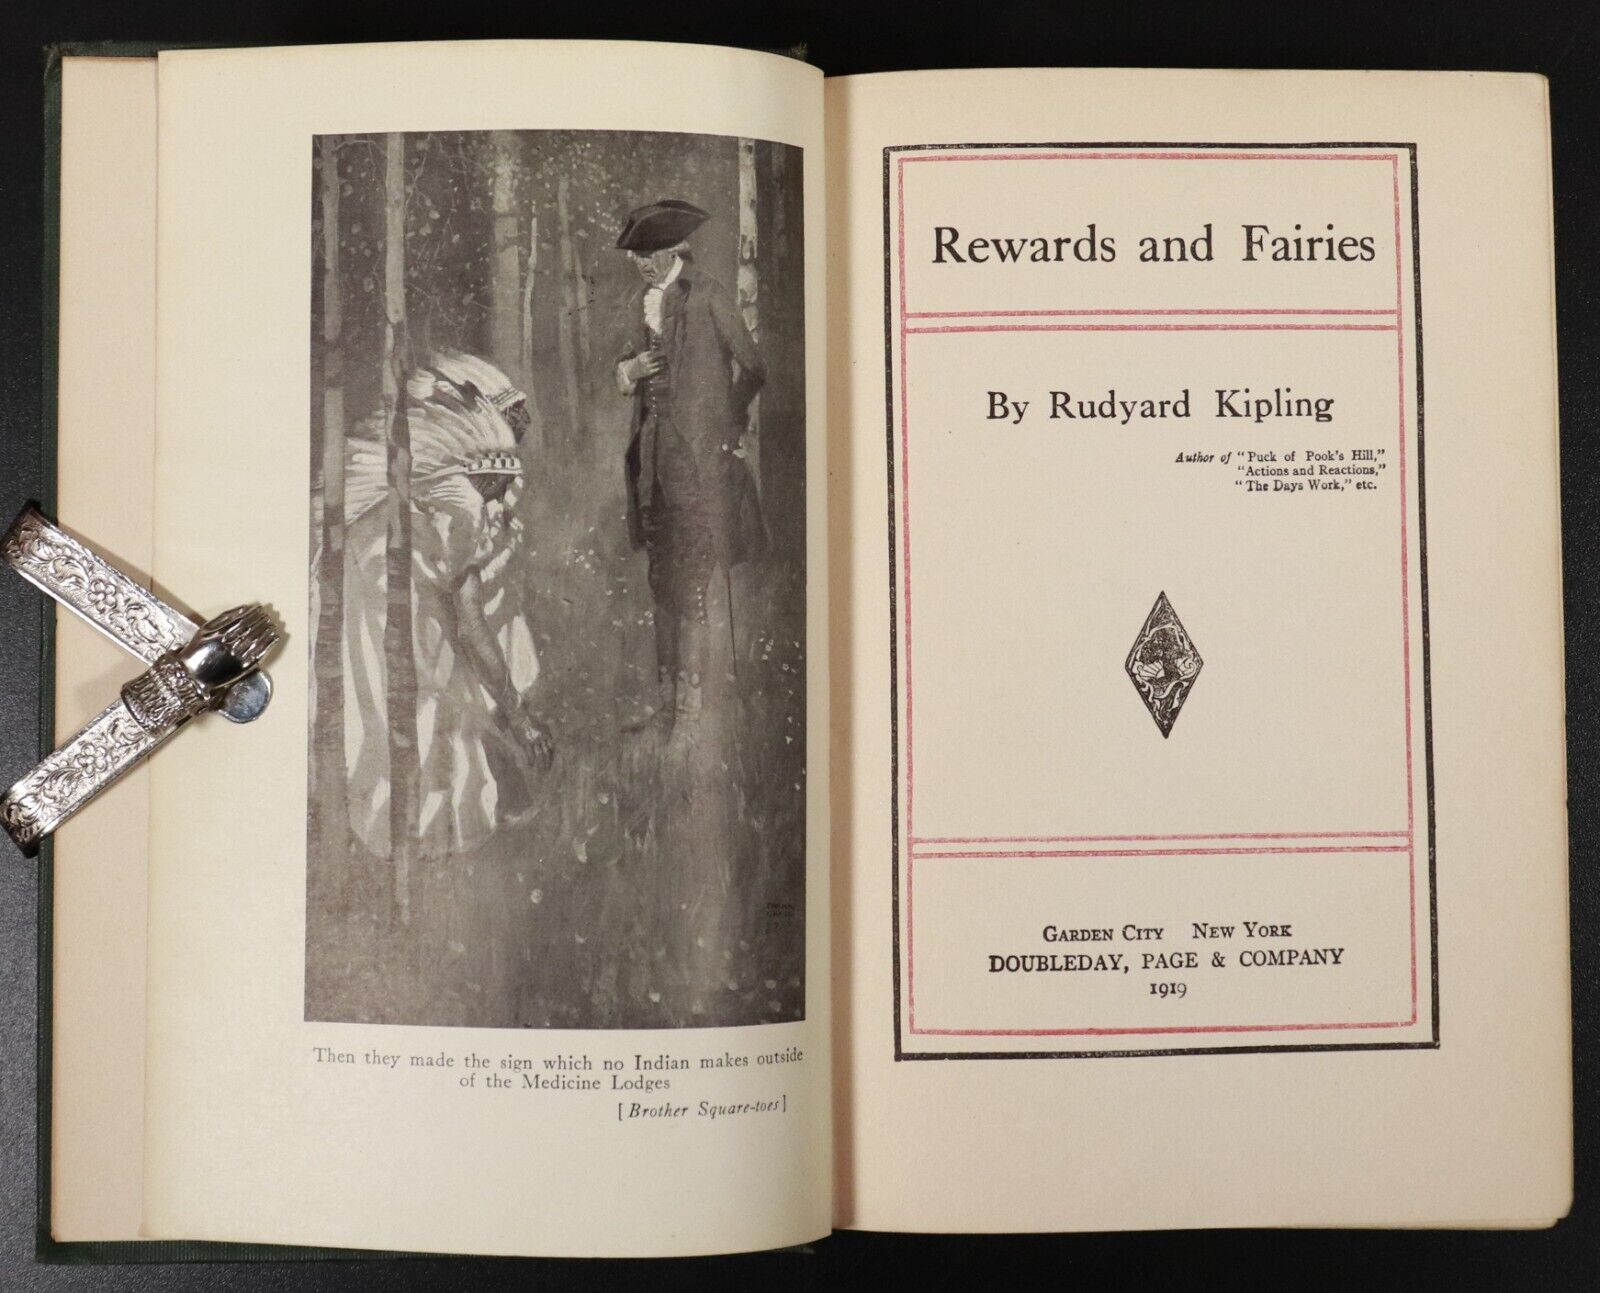 1919 Rewards and Fairies by Rudyard Kipling Antique Fiction Book Illustrated - 0